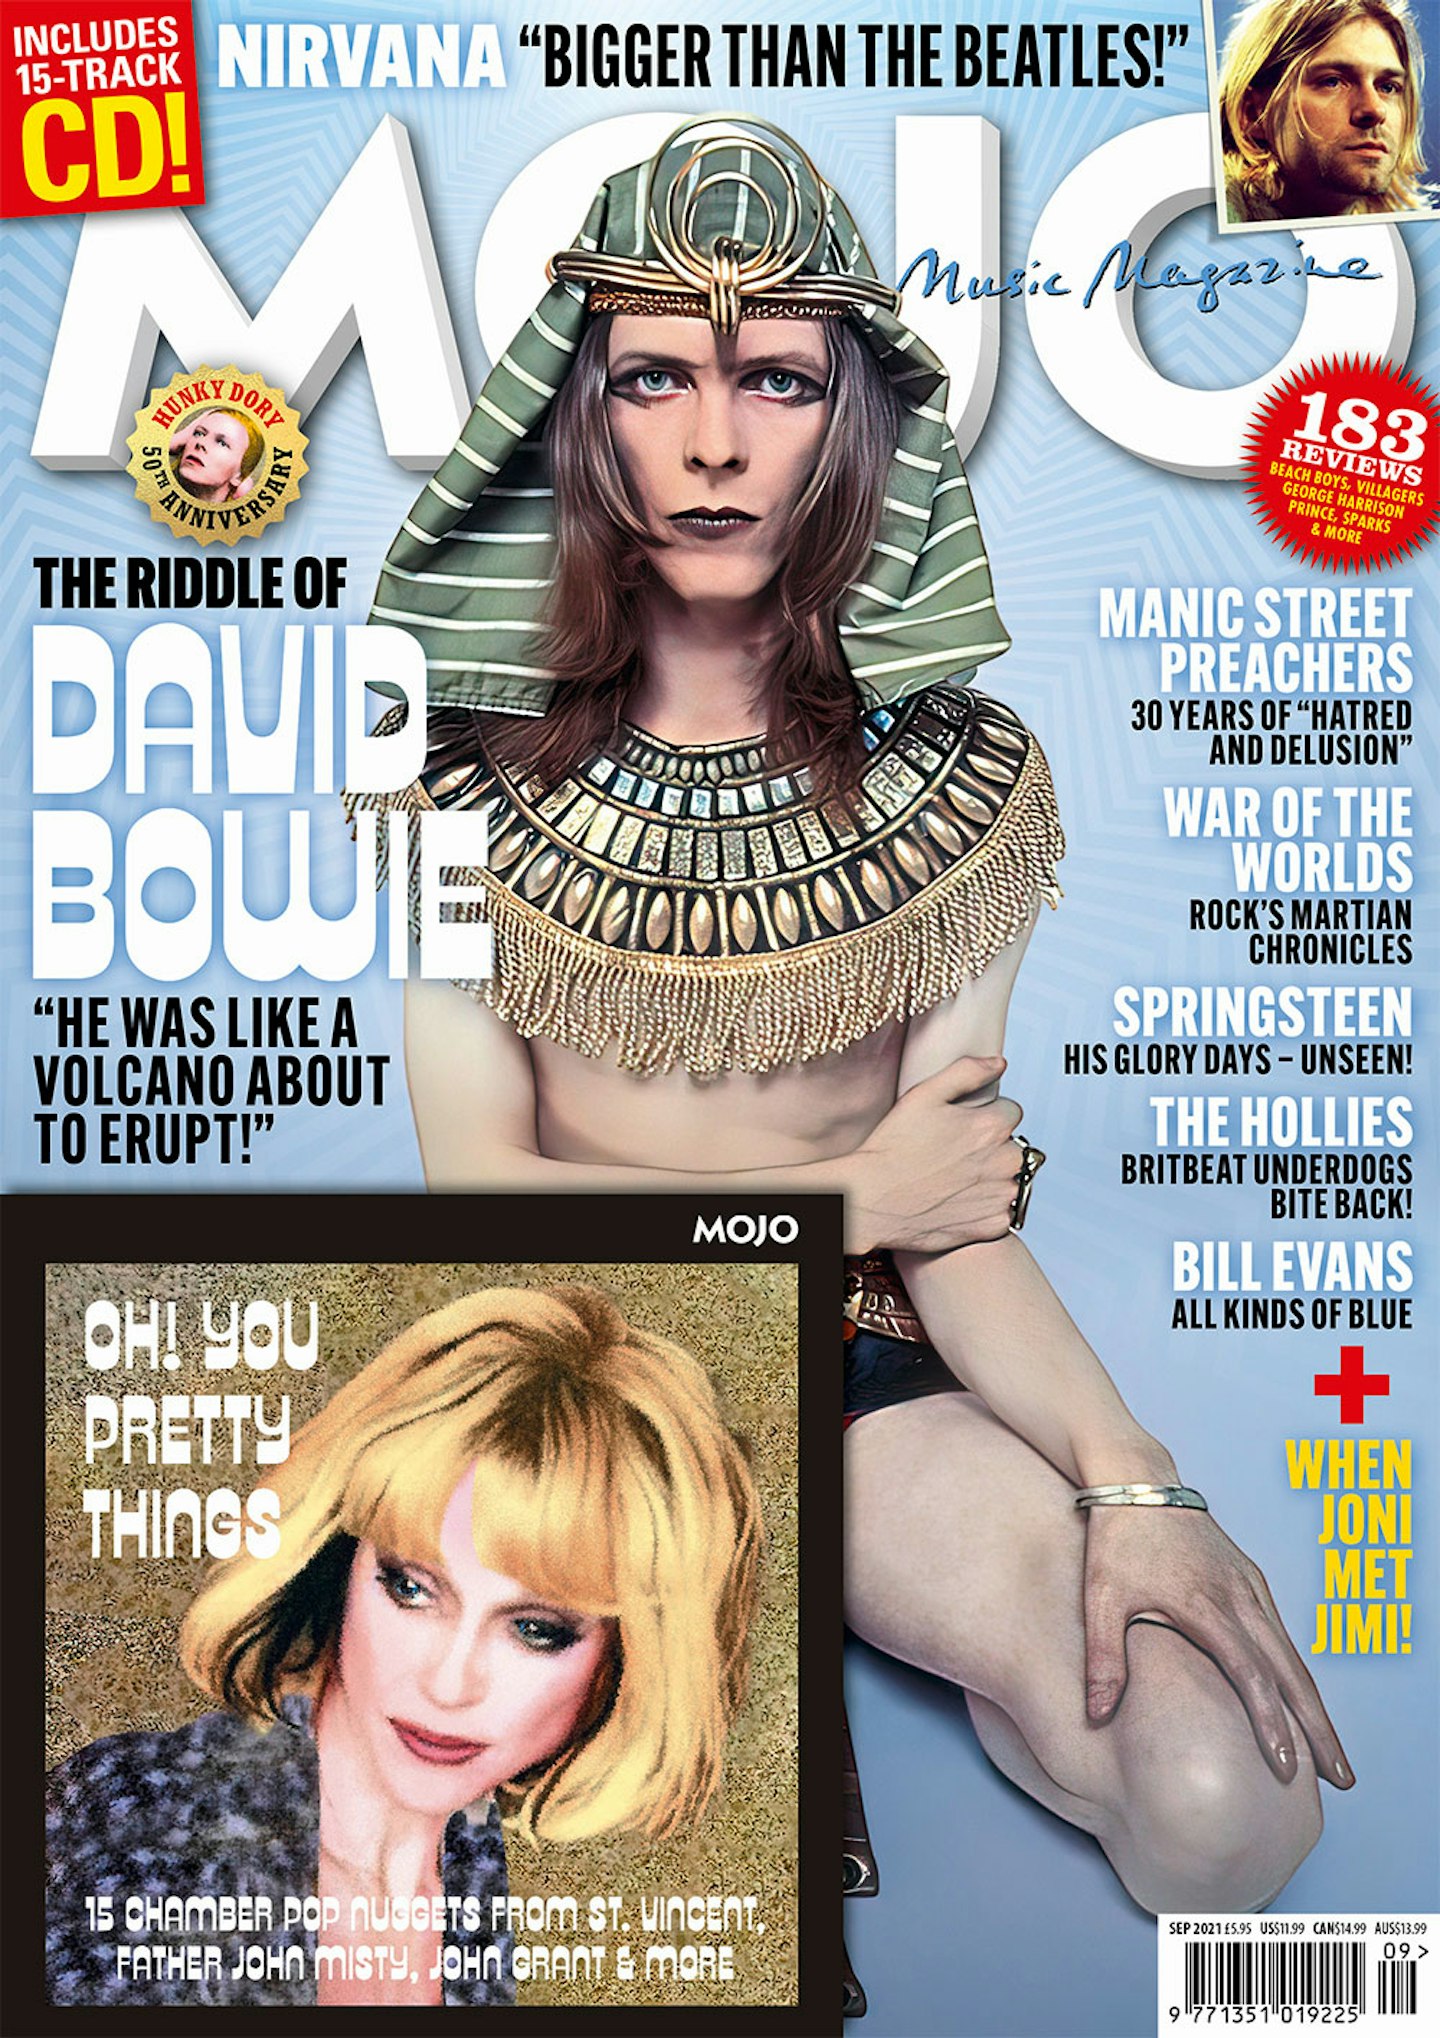 MOJO 334 magazine cover, featuring David Bowie